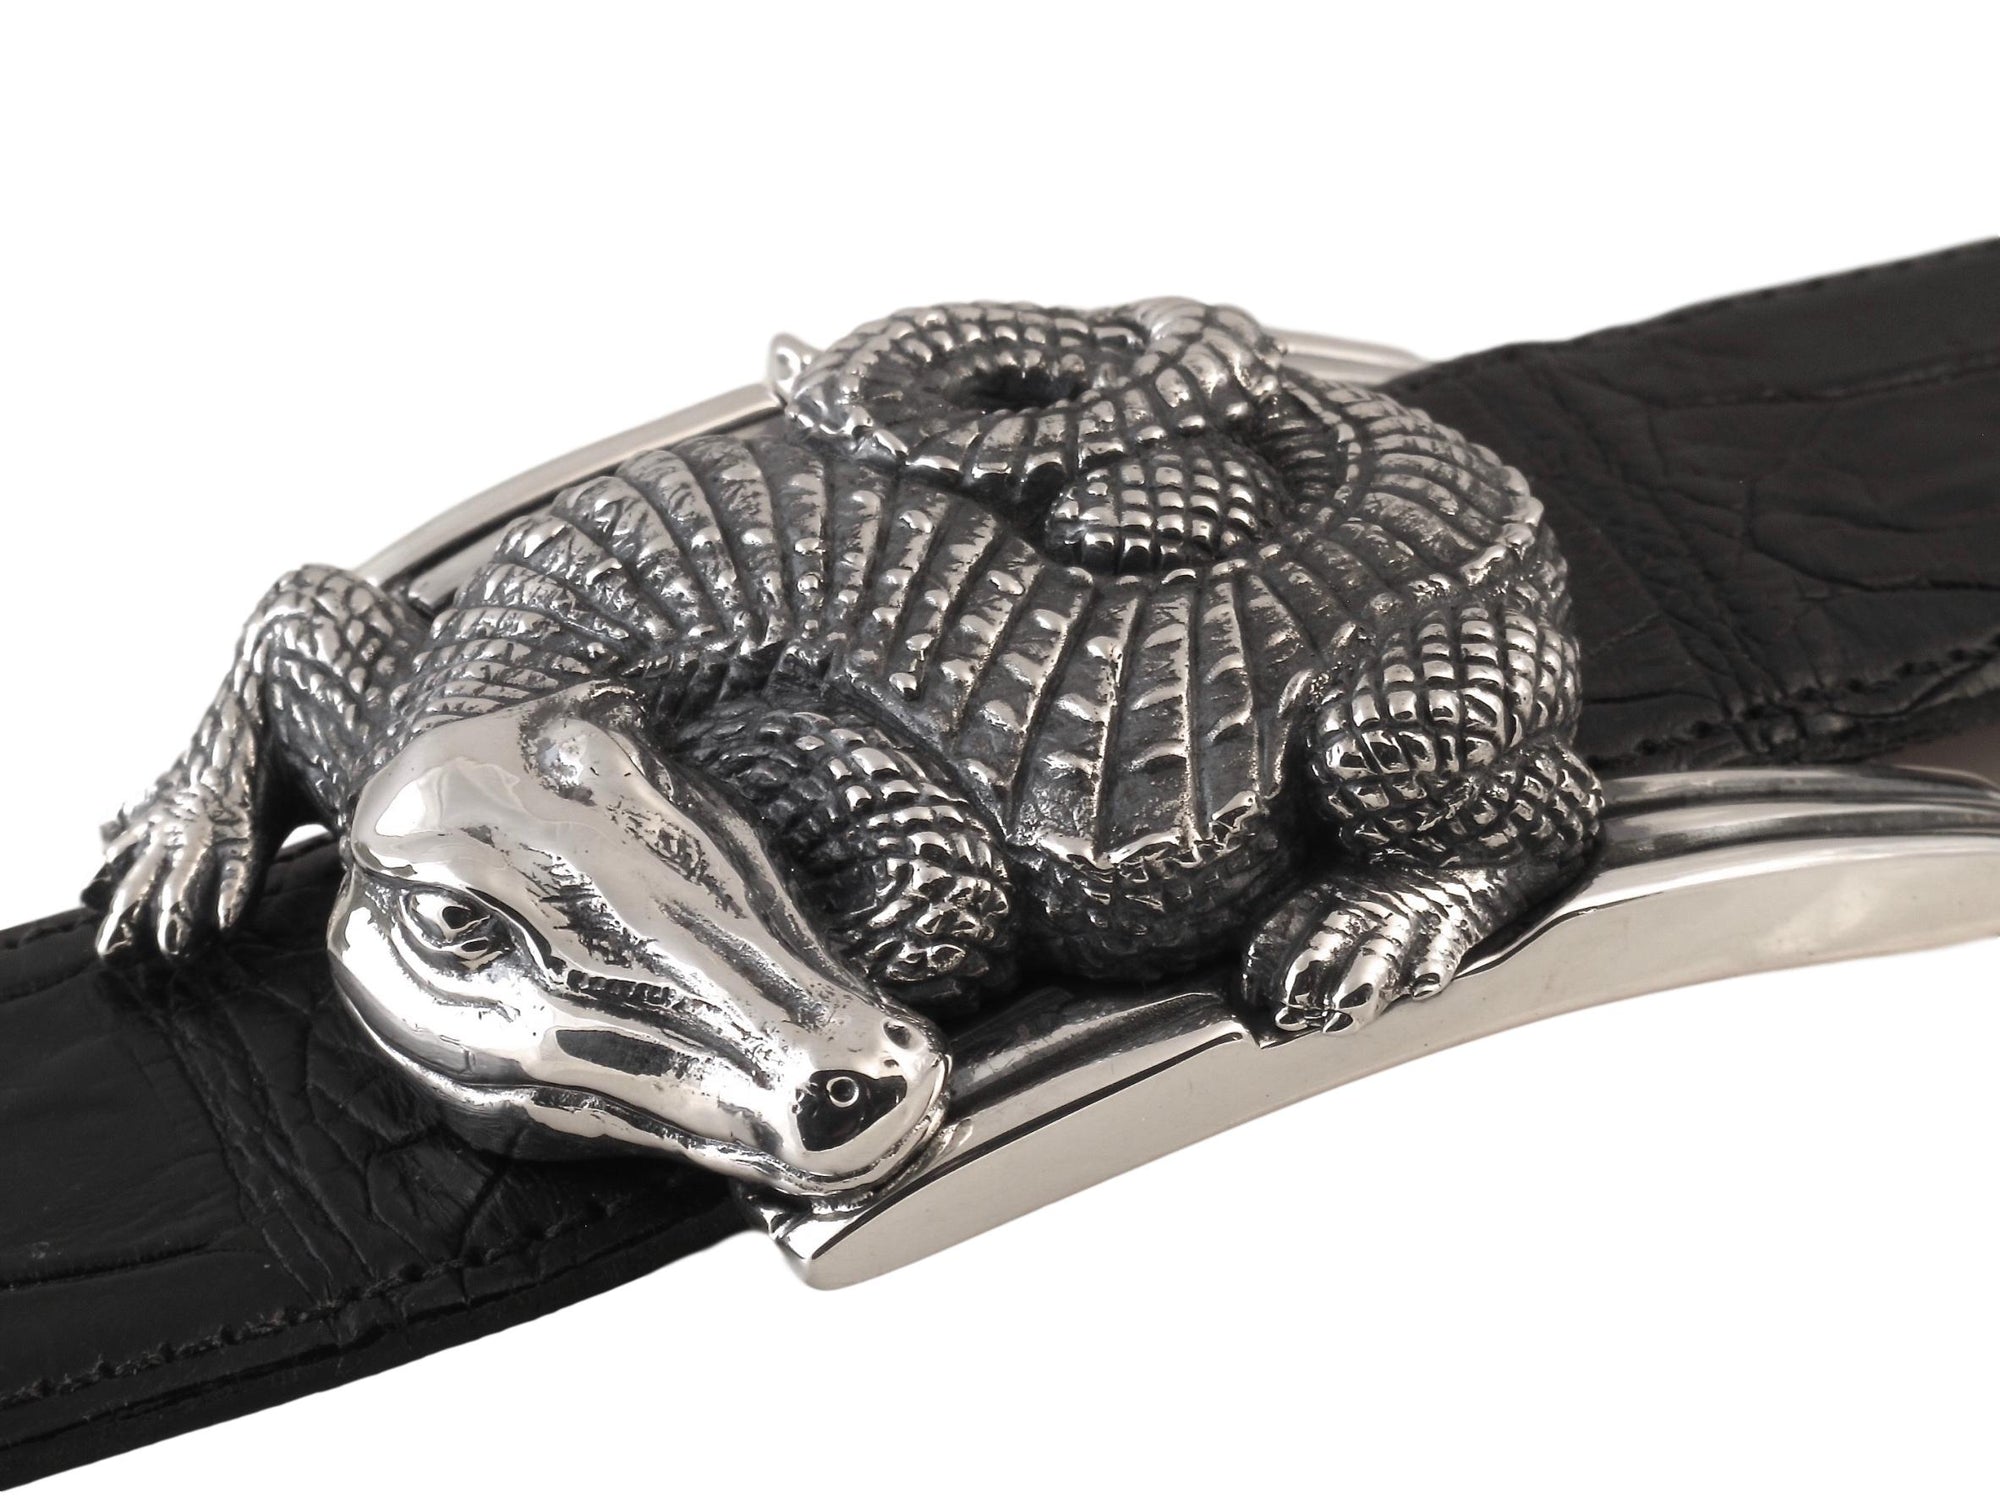 Front view of the Sterling Curved Alligator buckle showig its curled body resting on the polished buckle frame.